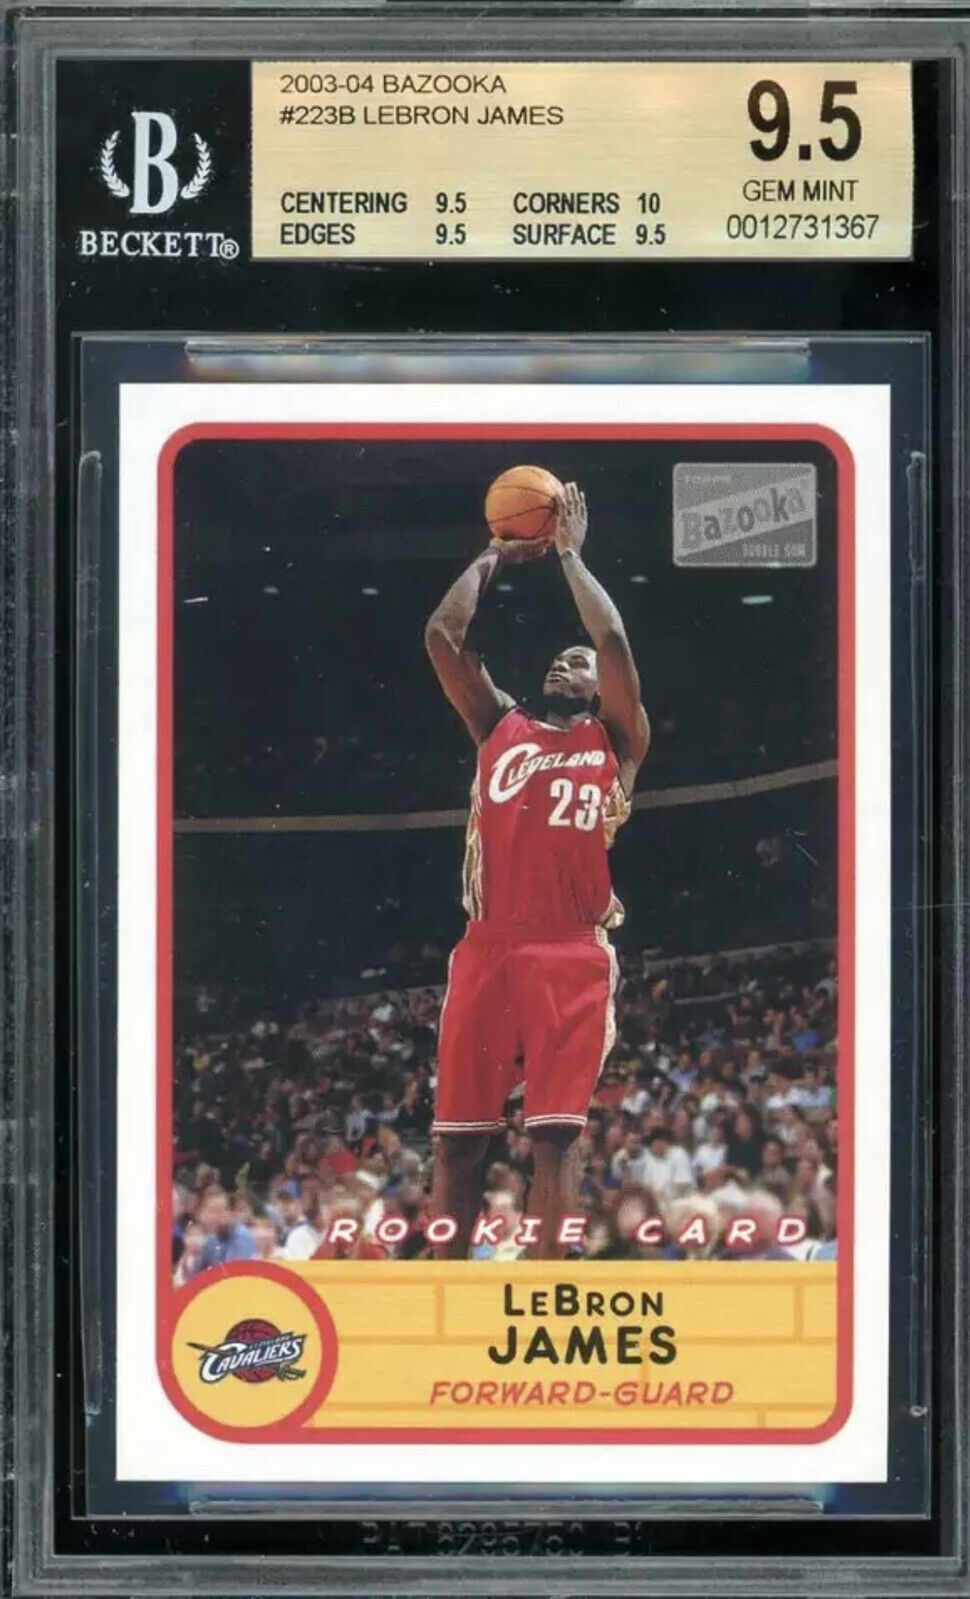 2003 Bazooka Lebron James RC #223 Red Jersey🏀BGS 9.5 w/ 10 9.5x3 Subs.